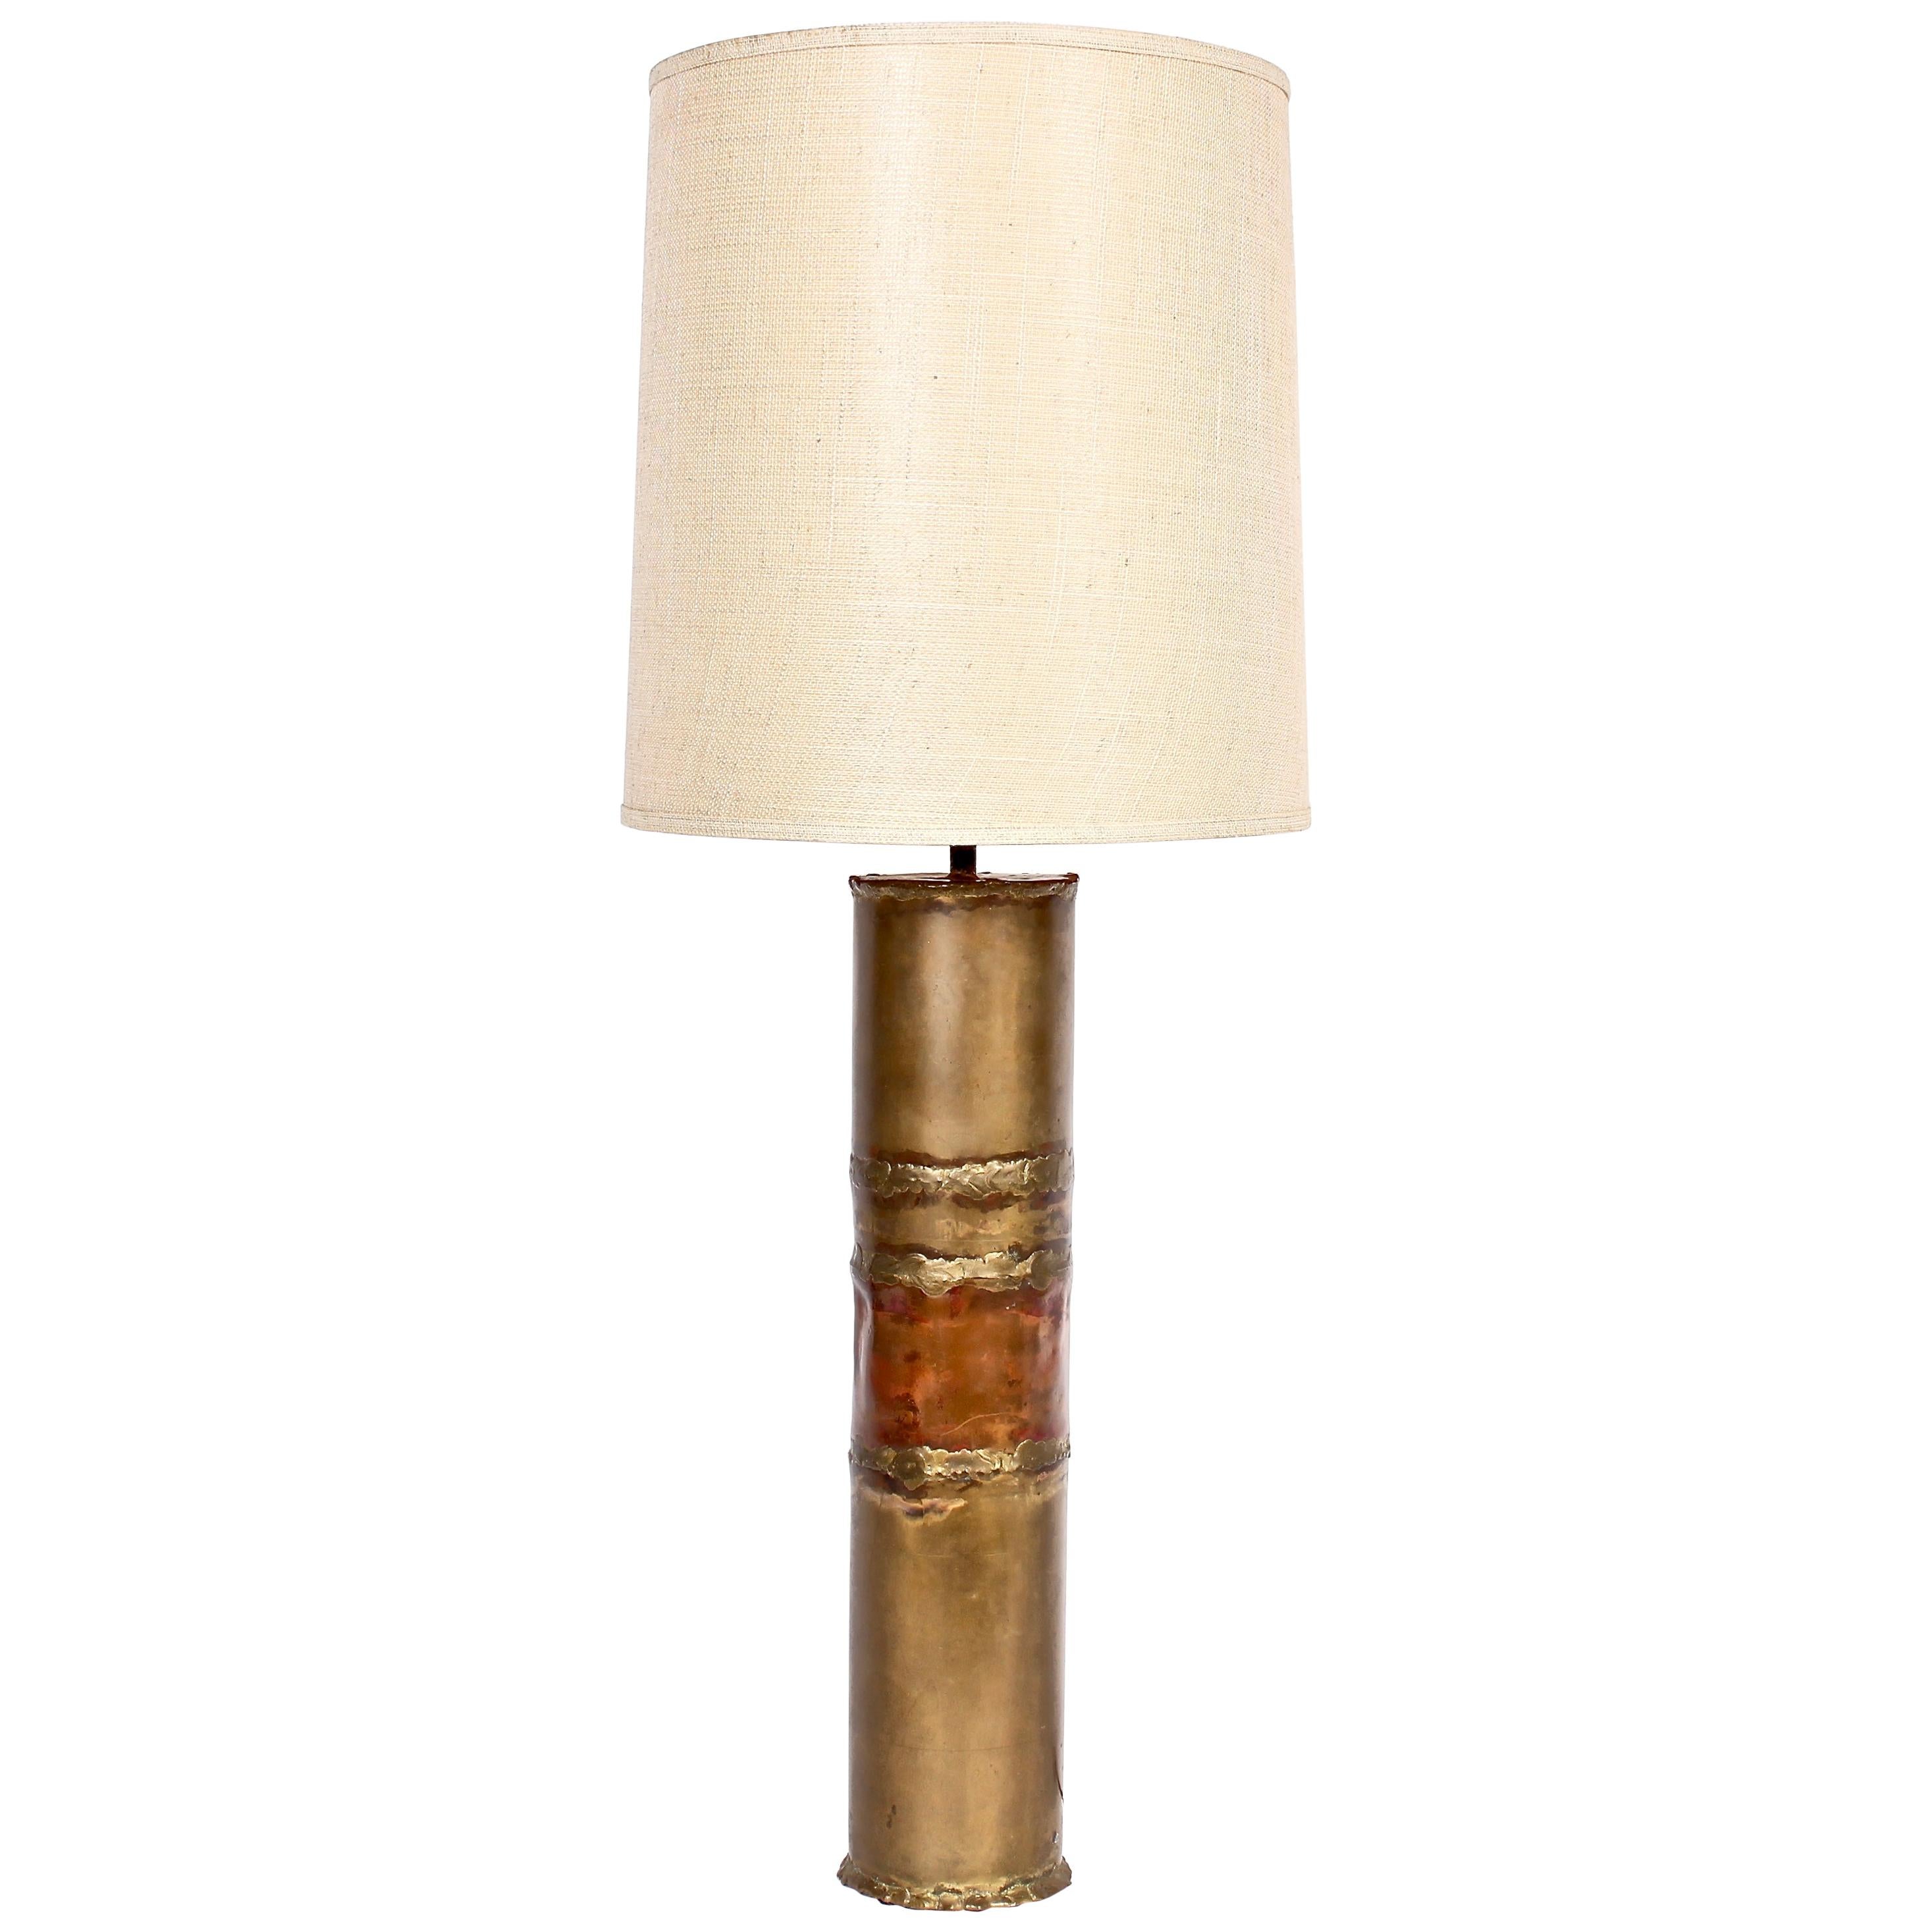 Substantial Silas Seandel Torched Mixed Metal Brutalist Table Lamp, 1974 For Sale